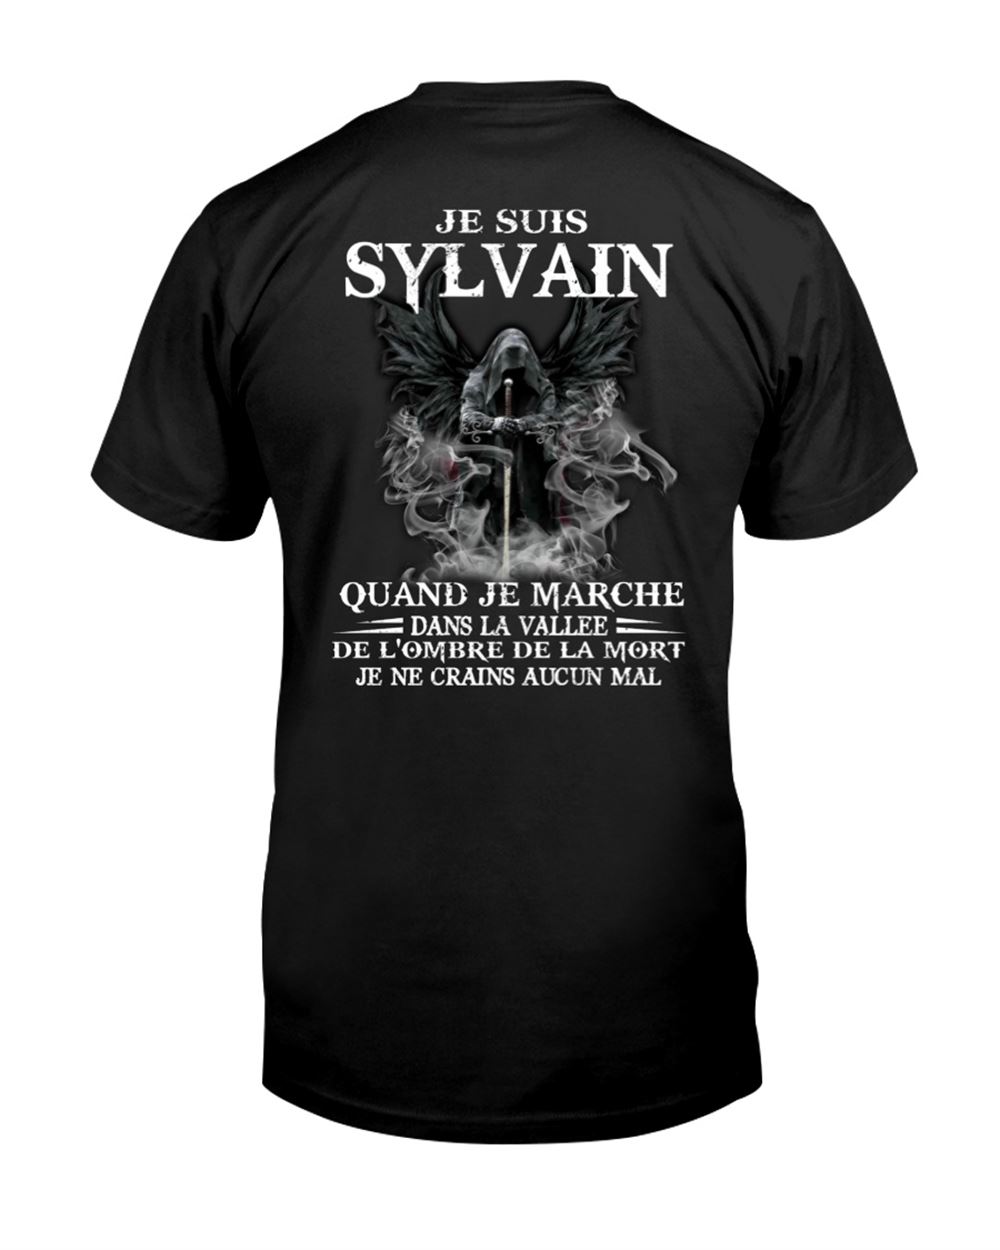 Quand Sylvain Classic T-shirt Awesome Gifts For Movie Lovers